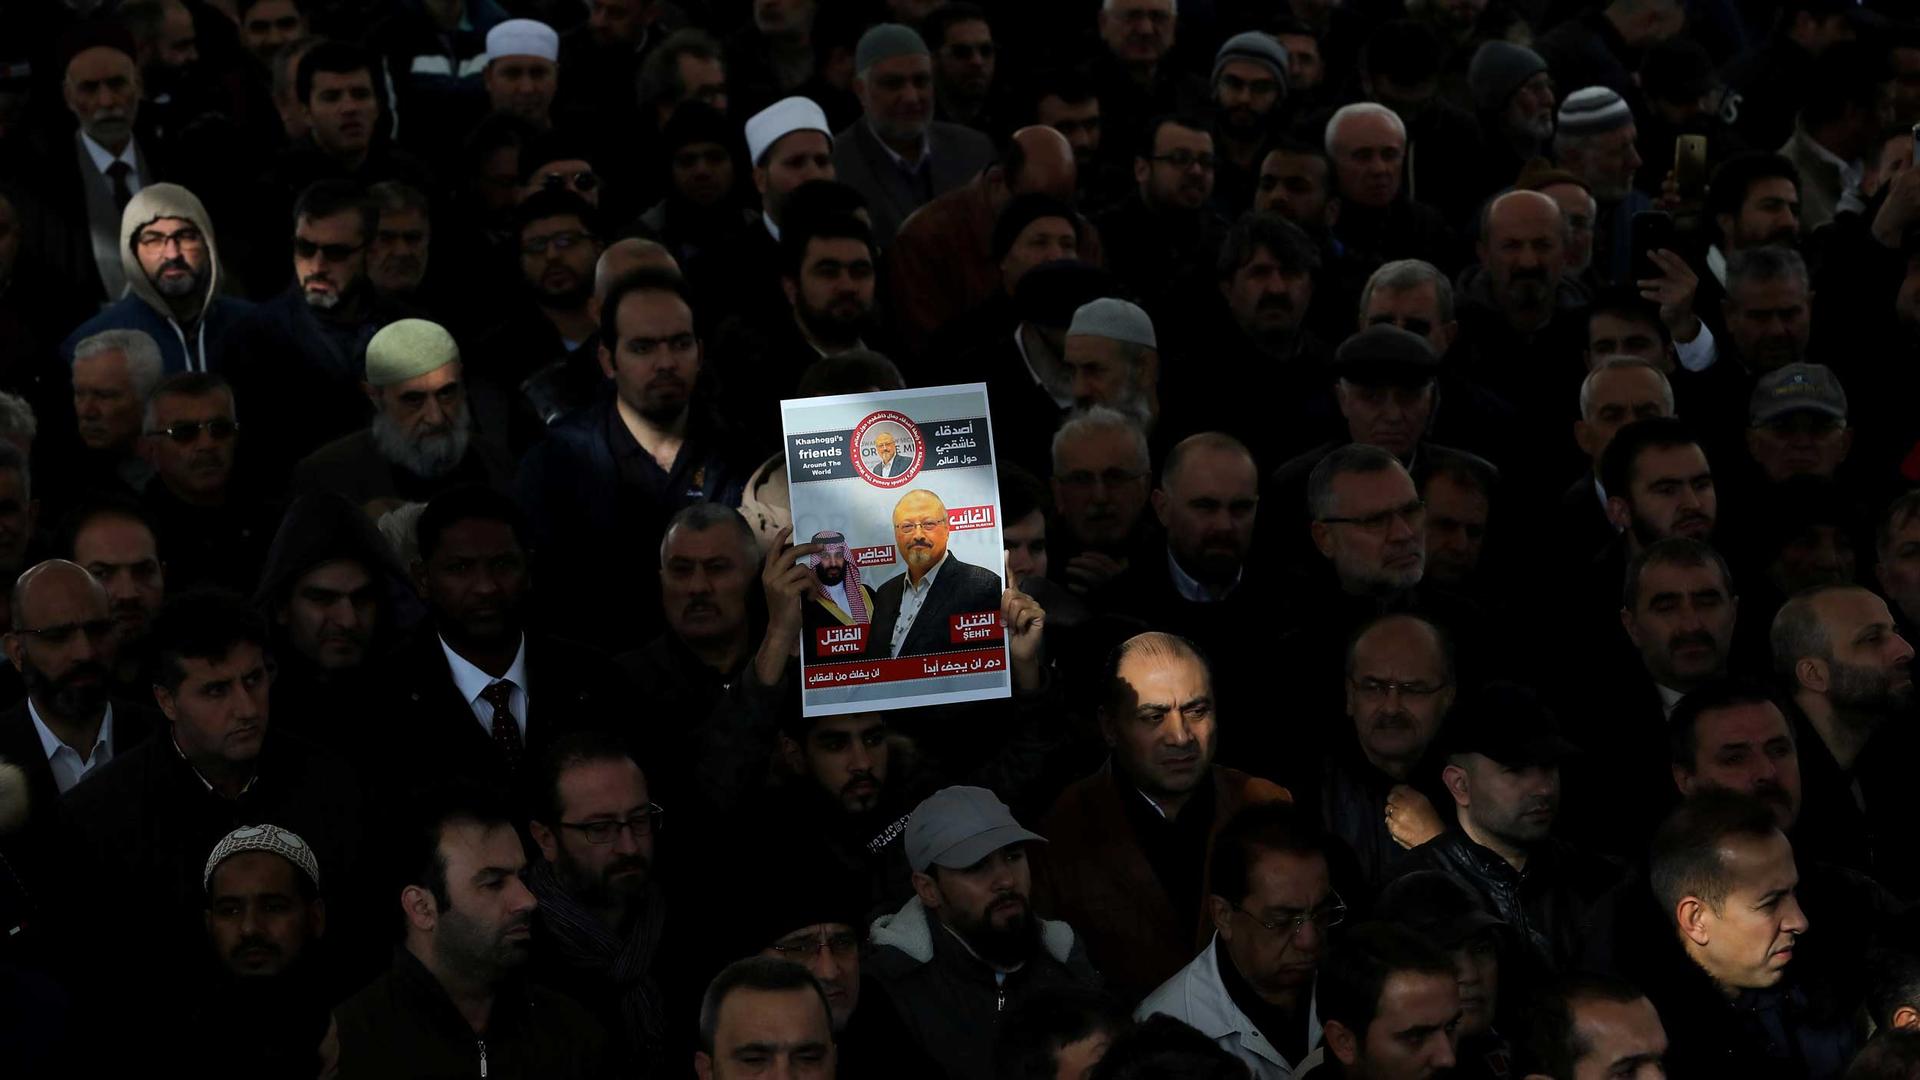 Dozens of people are praying and one person holds up a sign with Jamal Khashoggi's image on it